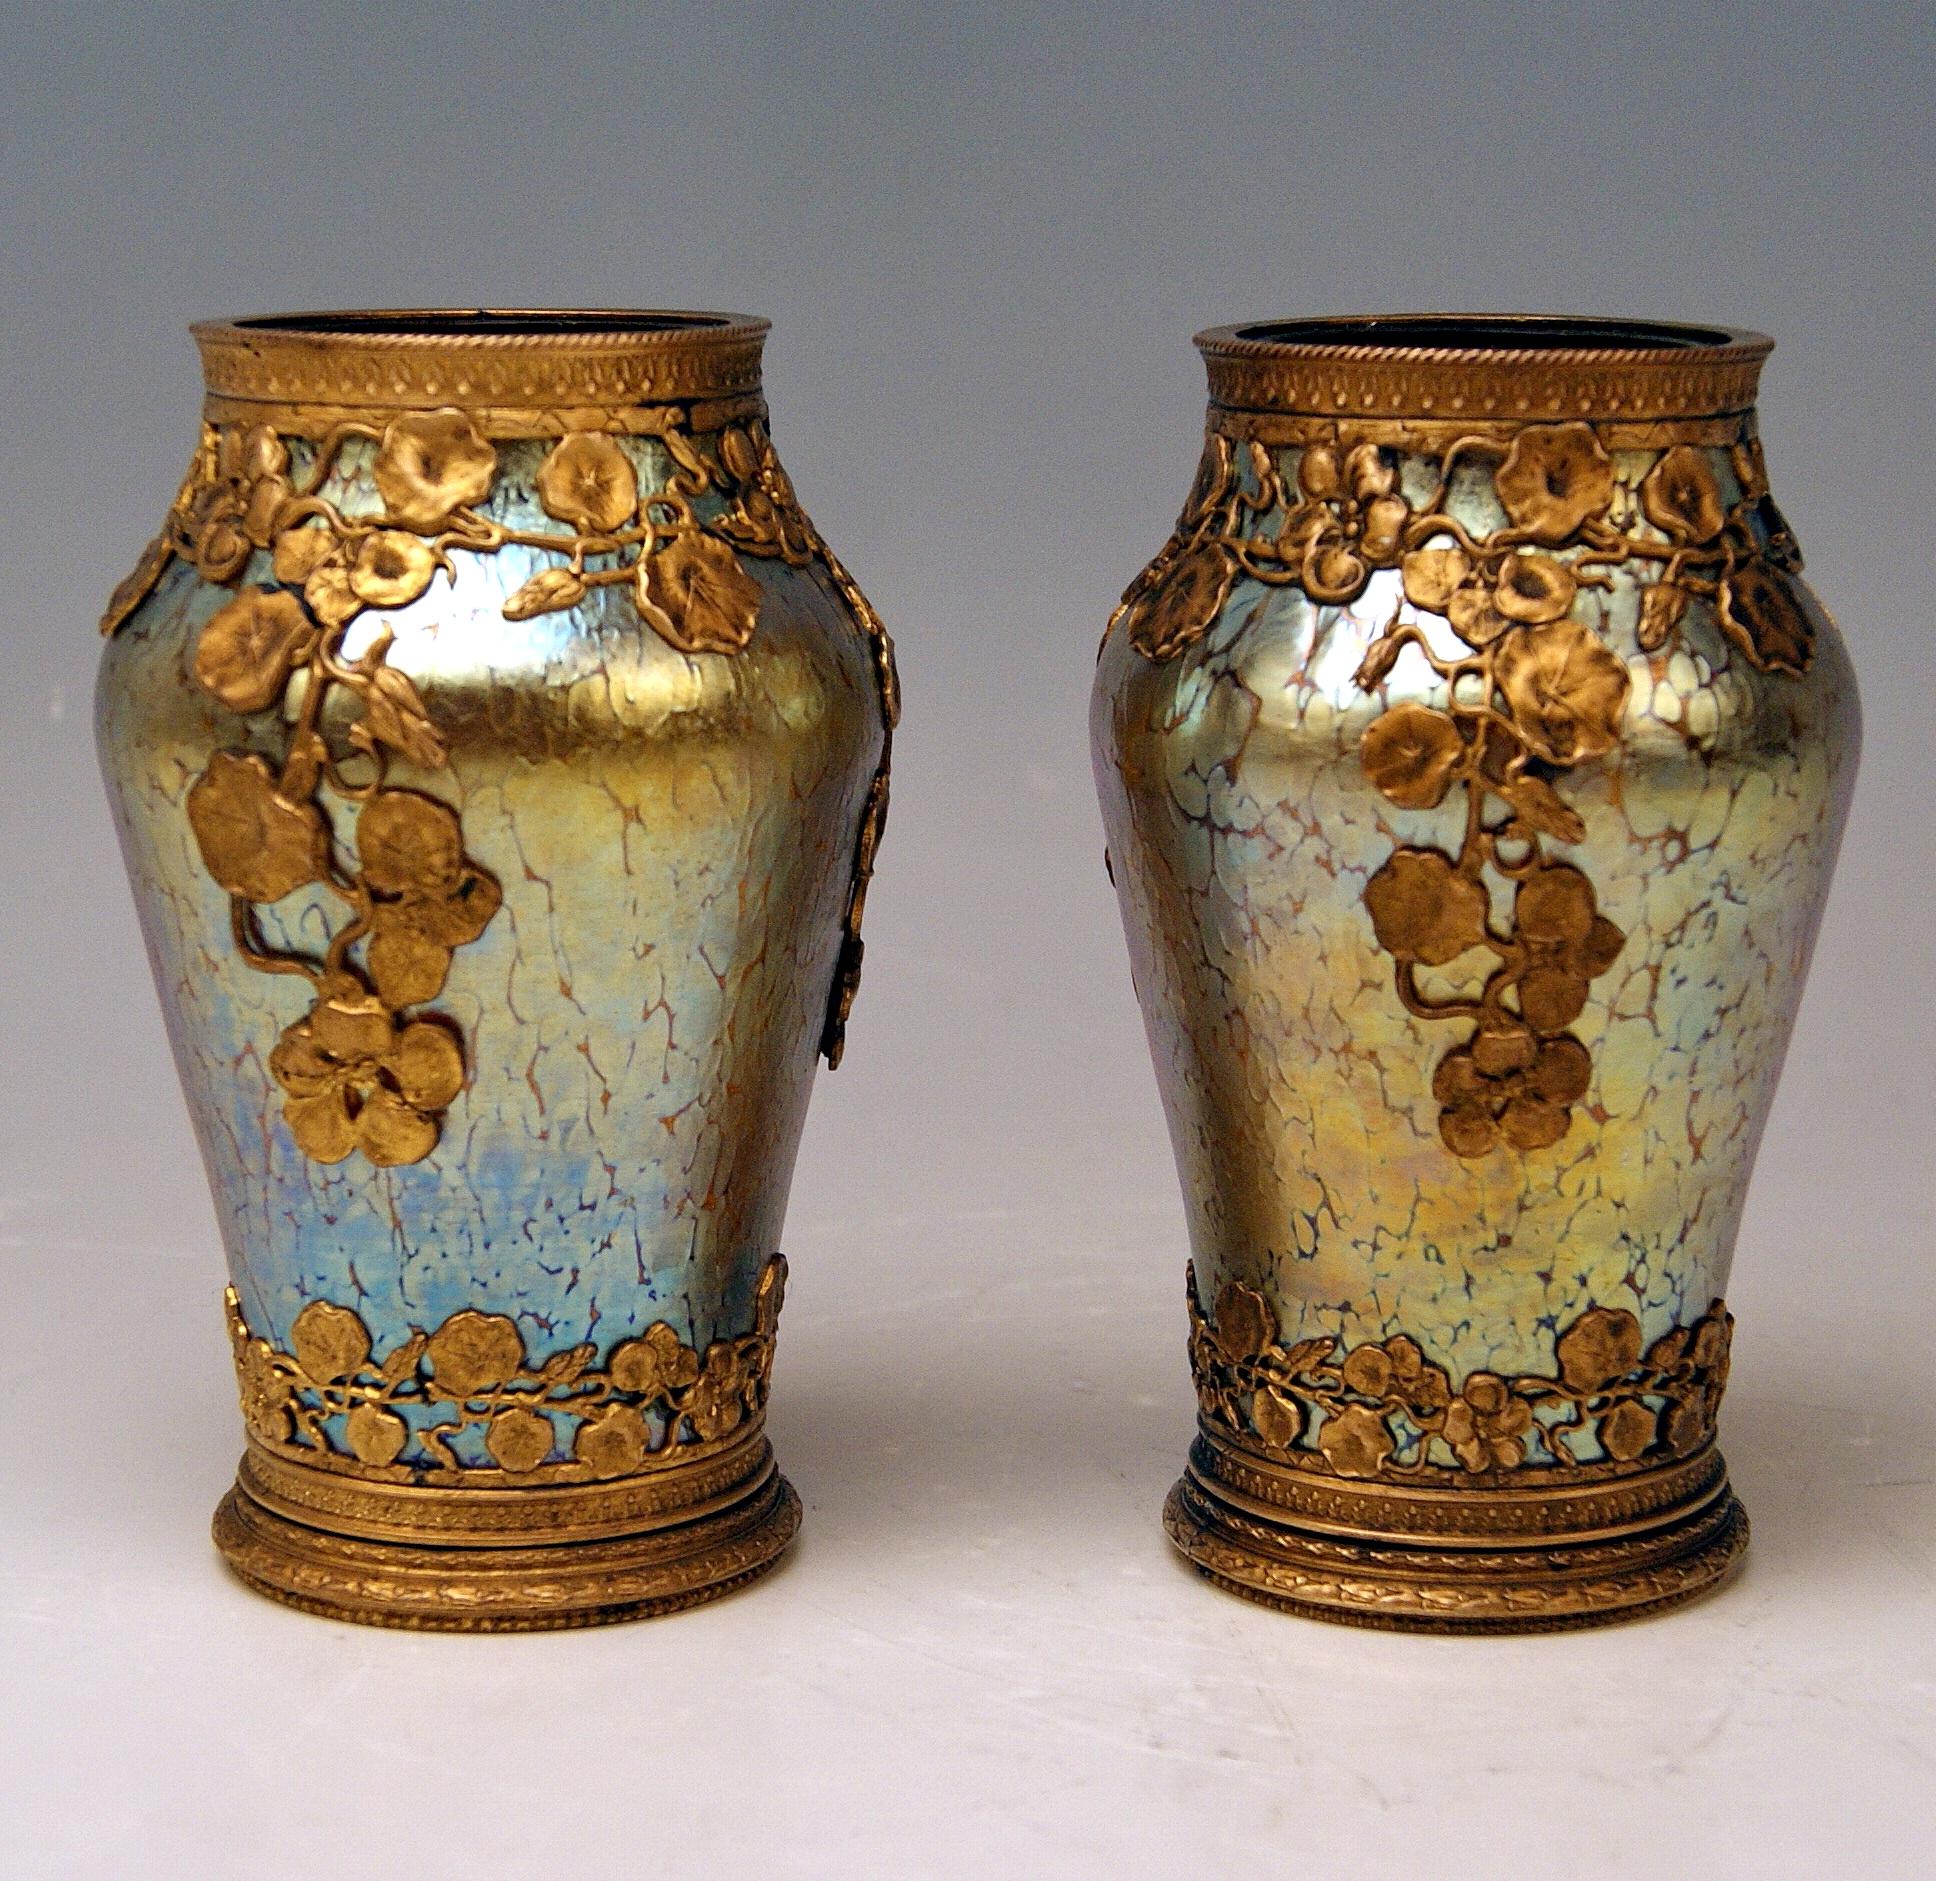 Pair of Art Nouveau vases
Made by Loetz (Lötz) Widow / Klostermuehle (Bohemia), circa 1905
Decor: Candia Papillon with bronze mountings / fittings
 
These are a finest pair of Loetz Art Nouveau vases of tapering type (slightly